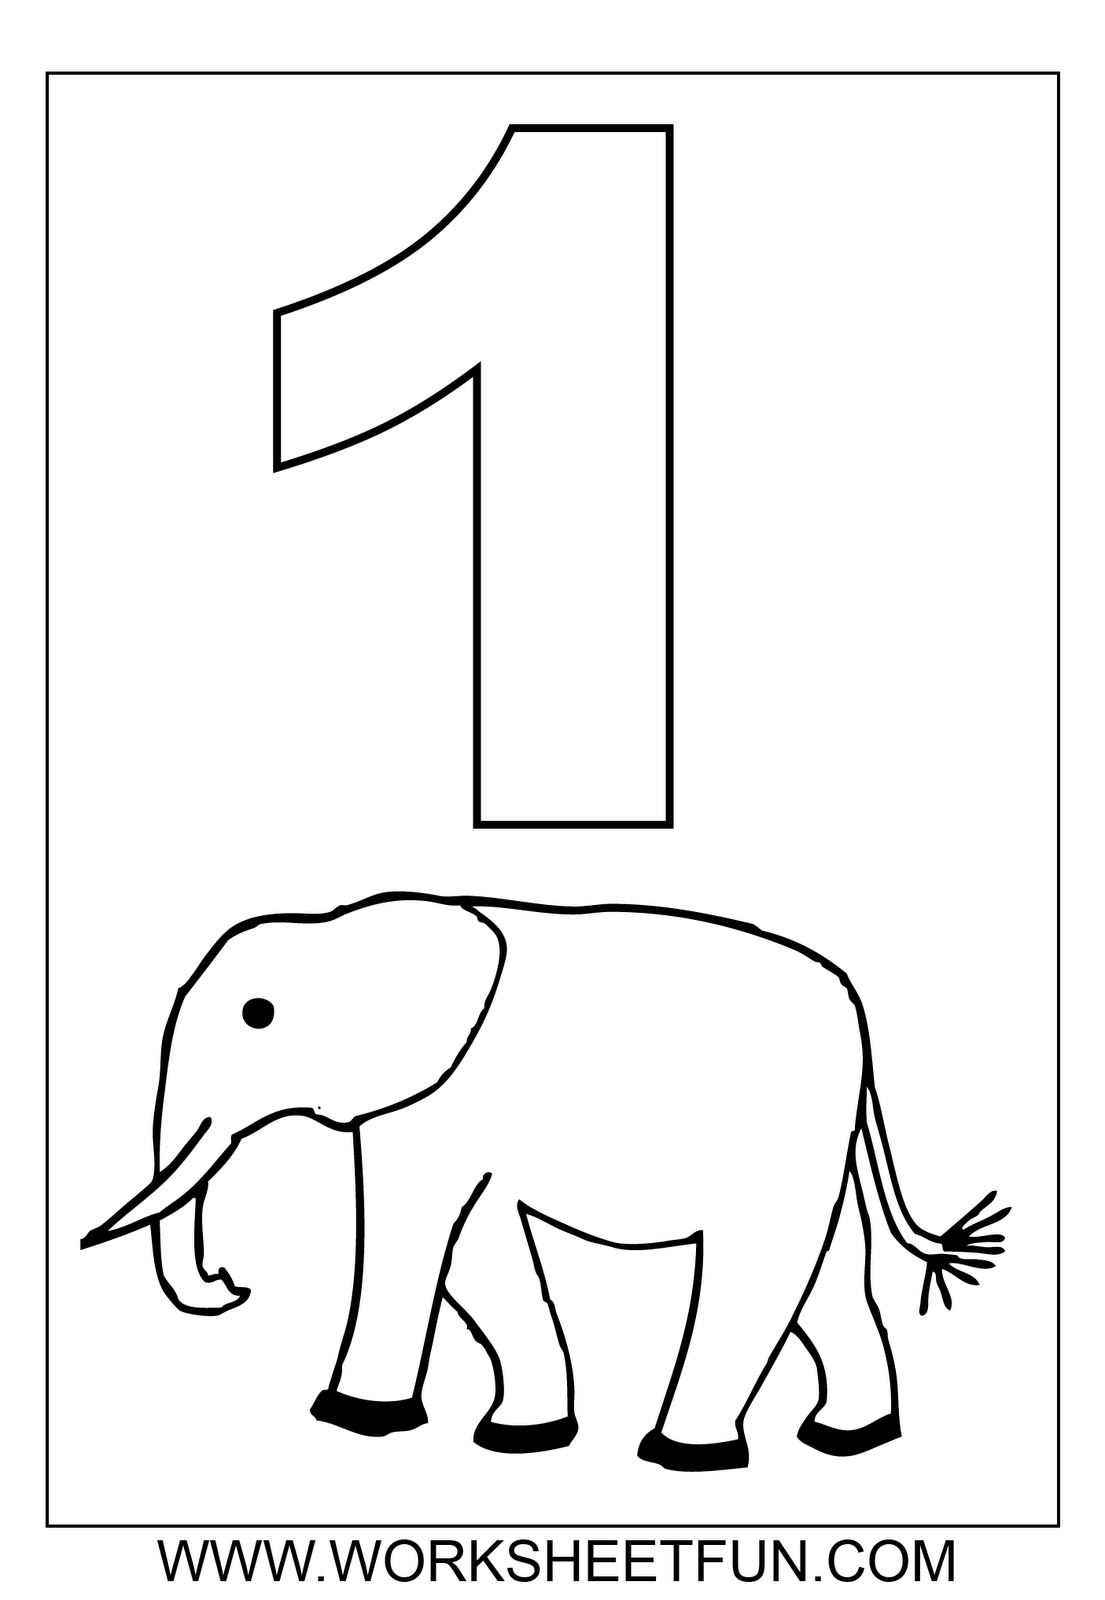 Number one tracing and coloring worksheets crafts and worksheets for preschooltoddler and kindergarten